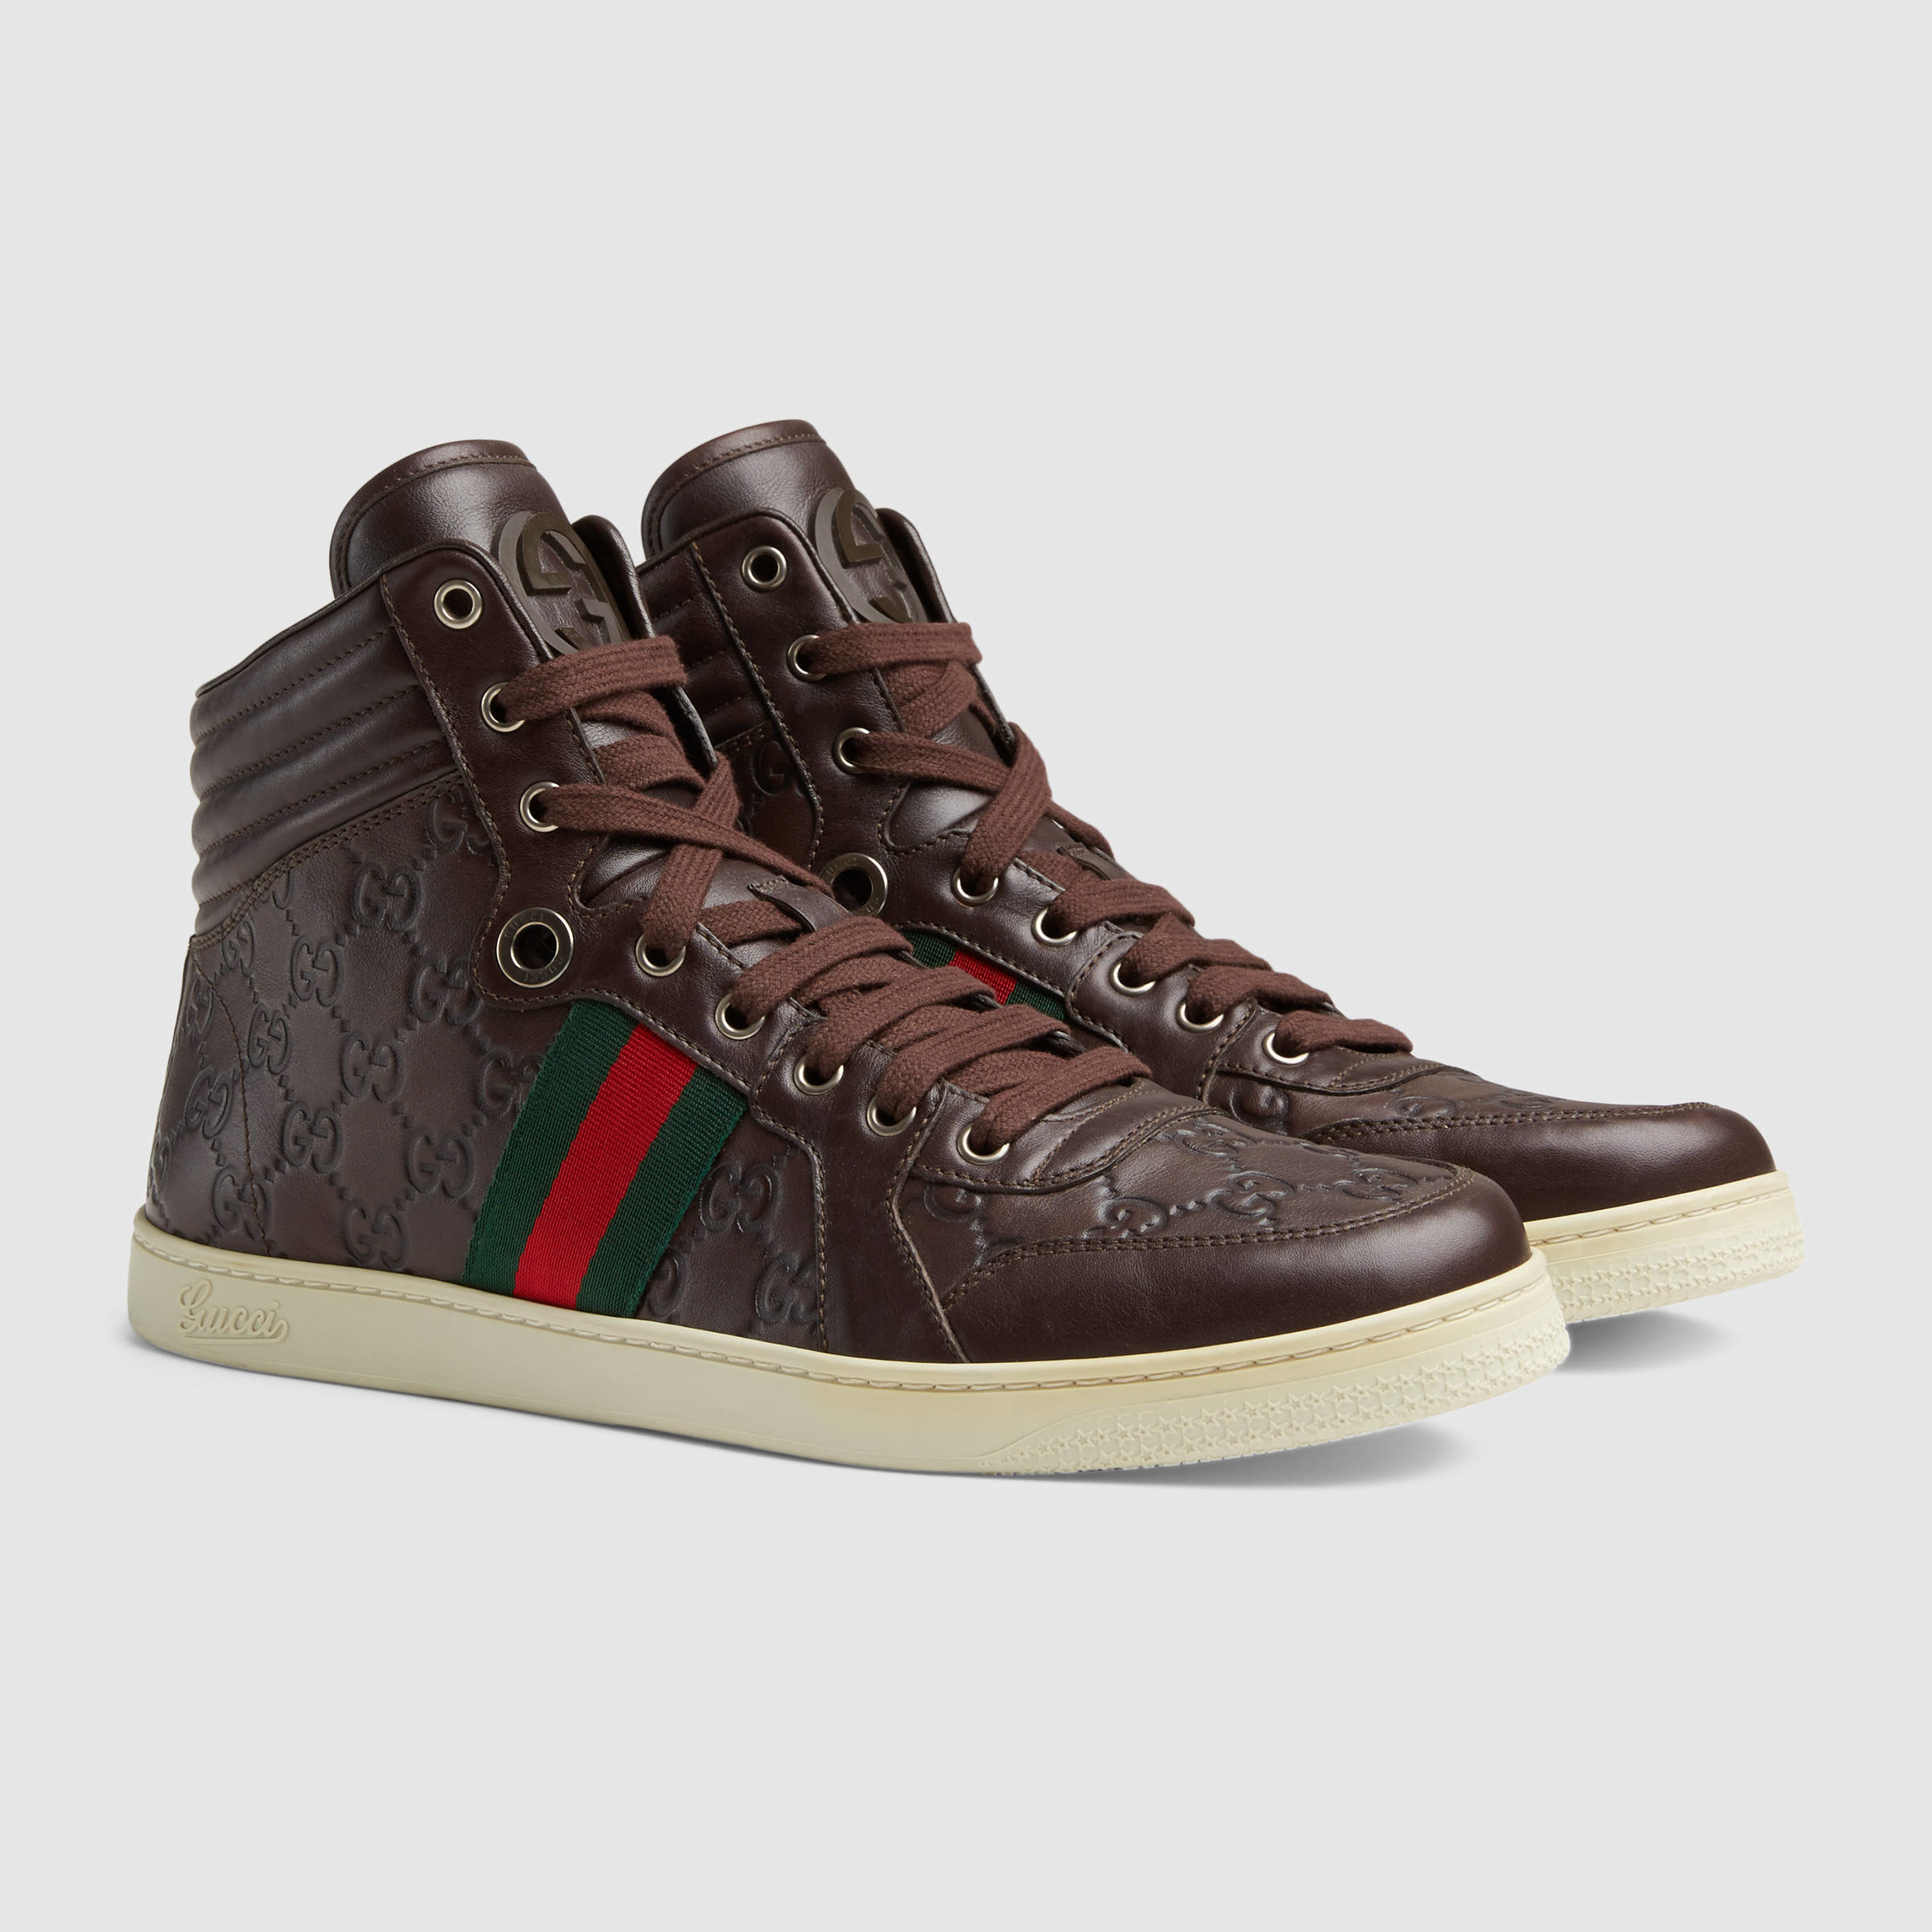 brown gucci high top sneakers,Quality assurance,protein-burger.com